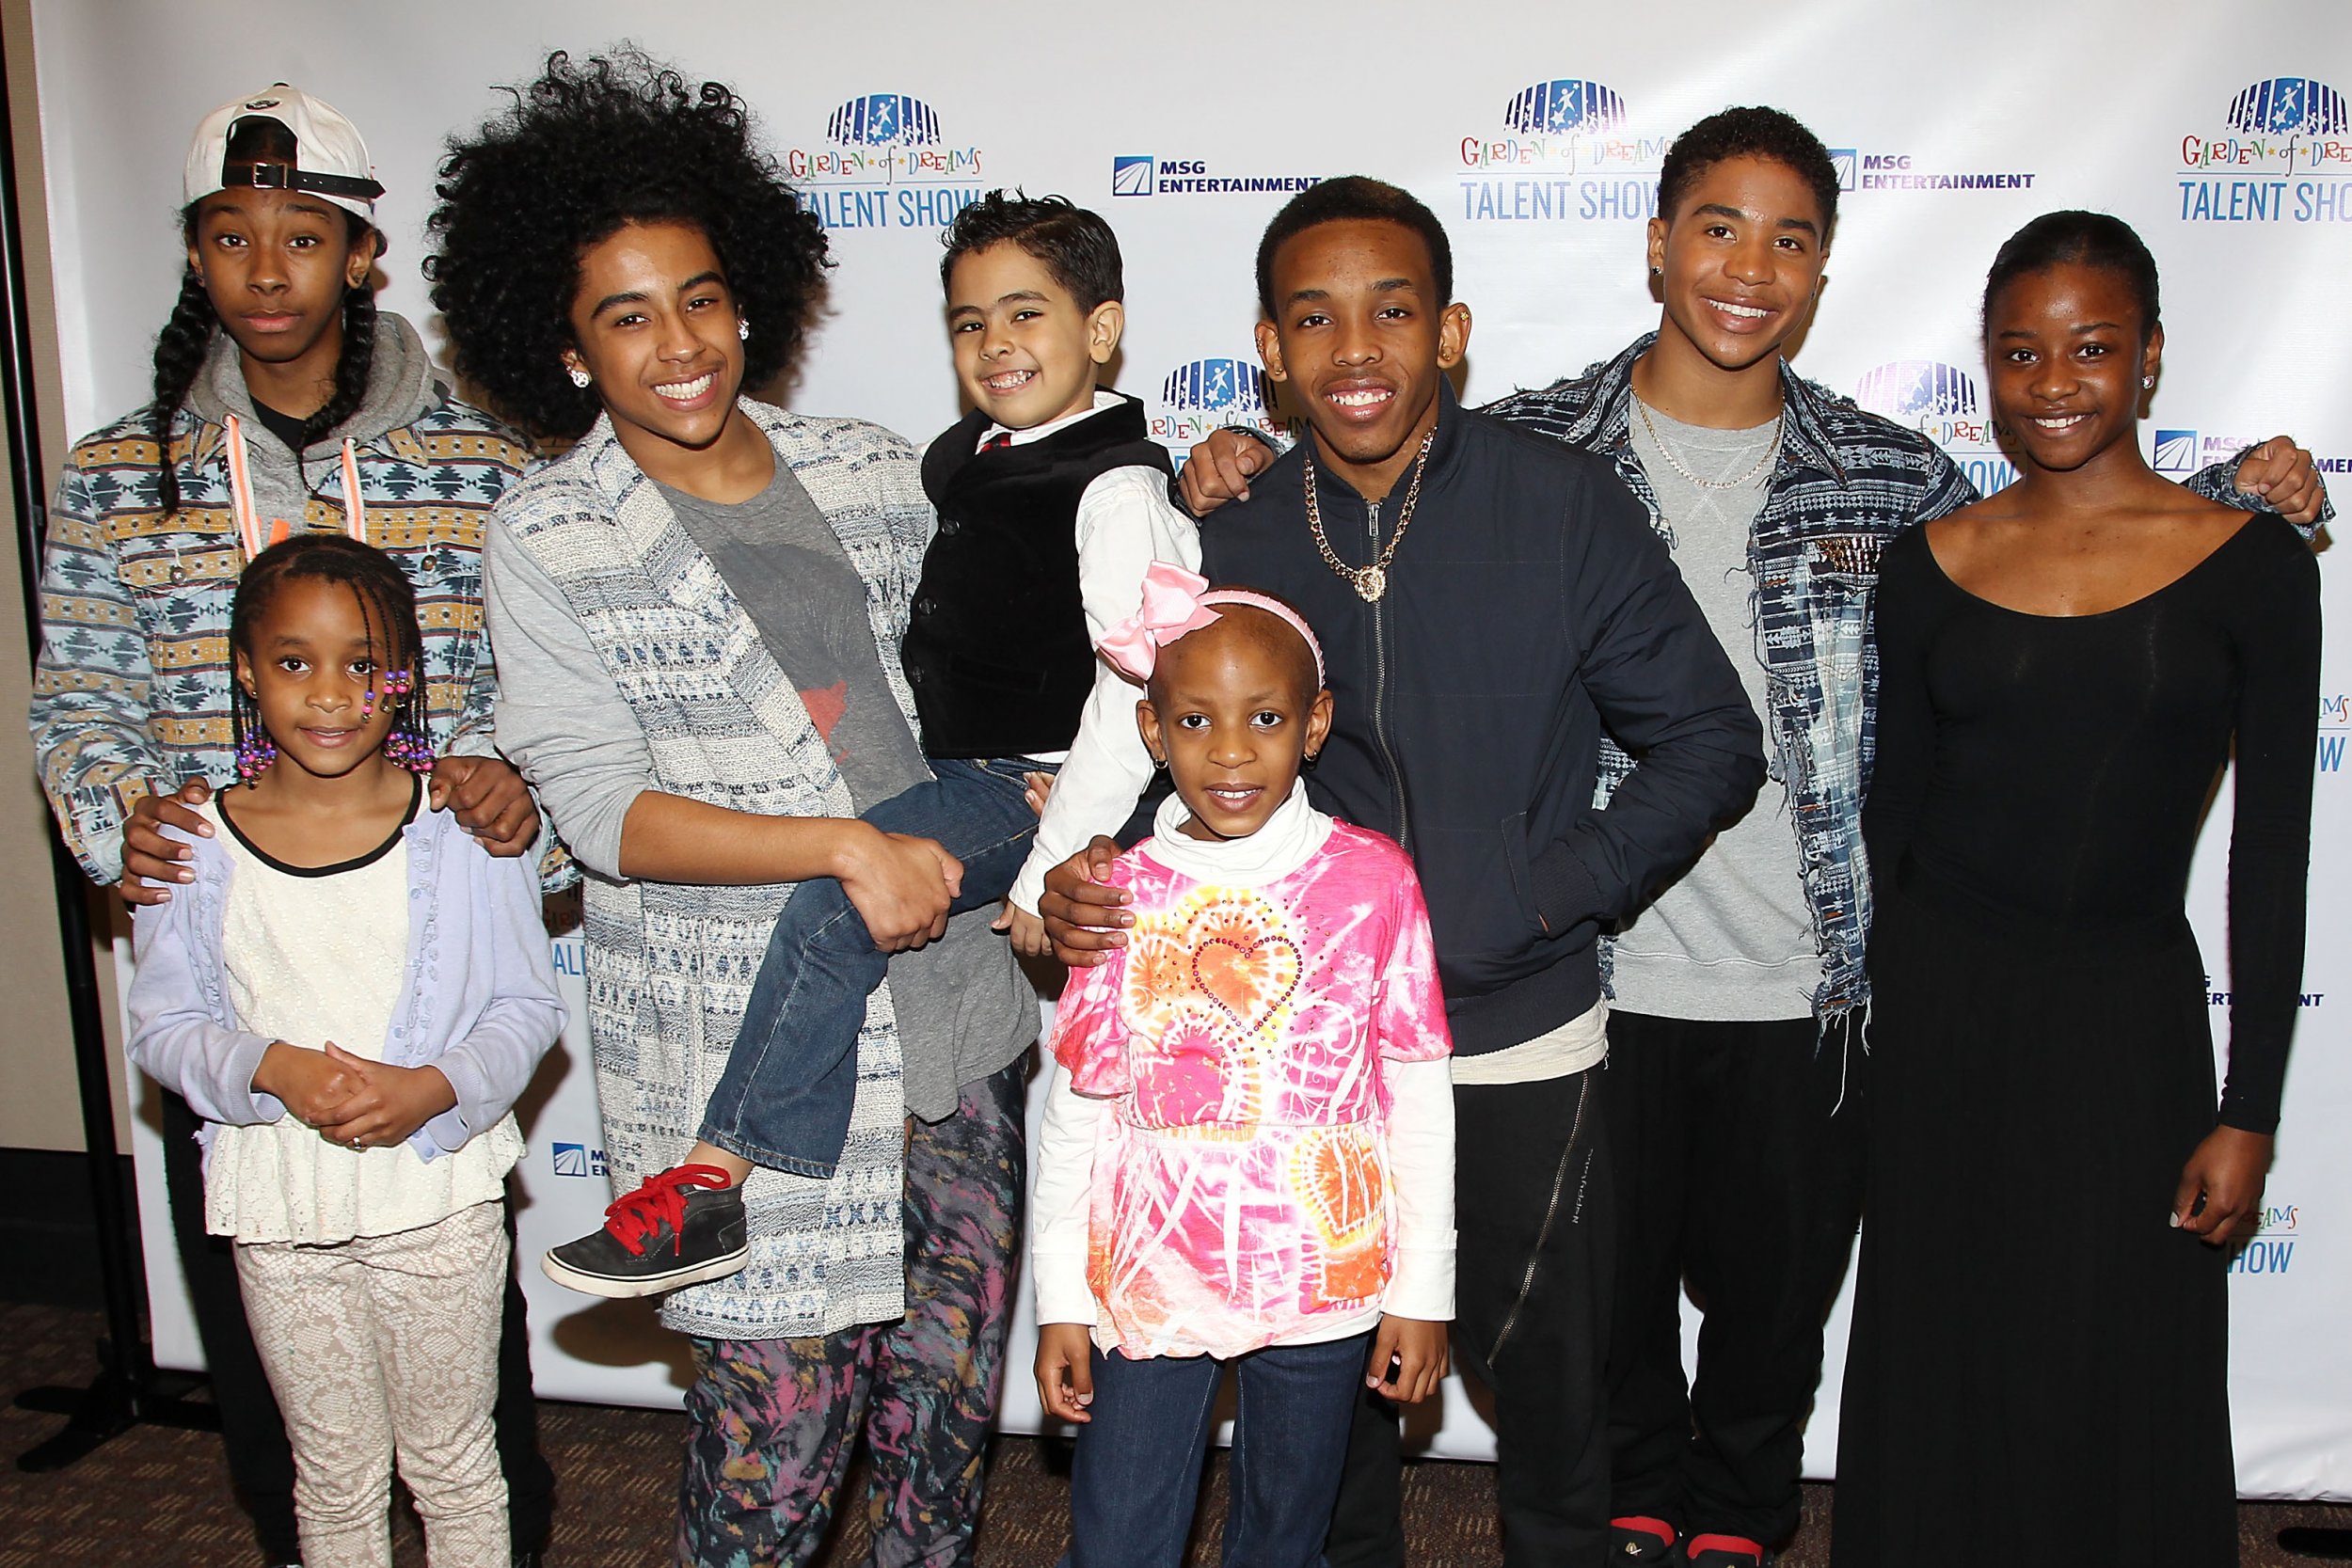 Mindless Behavior with Performers